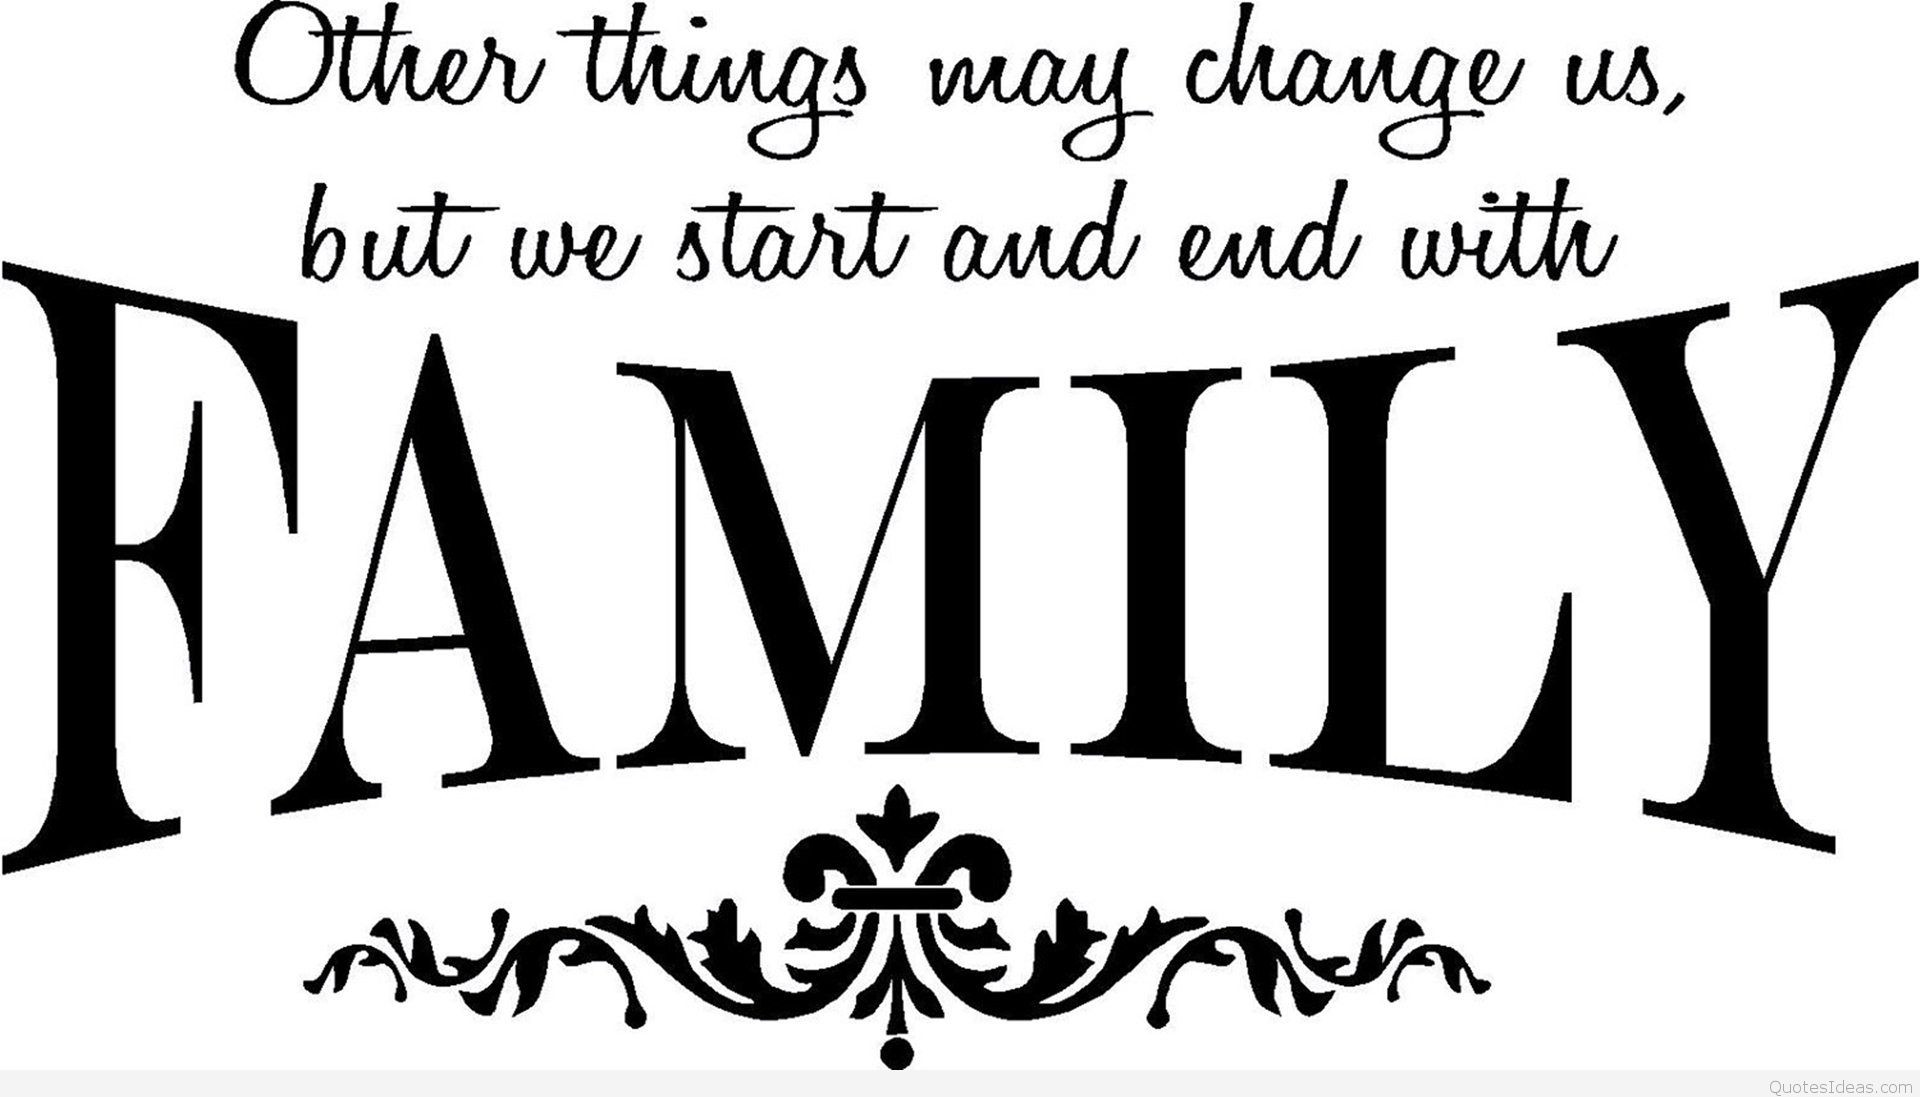 Inspiring Family Quotes
 Cute cover family quote 2015 inspiring